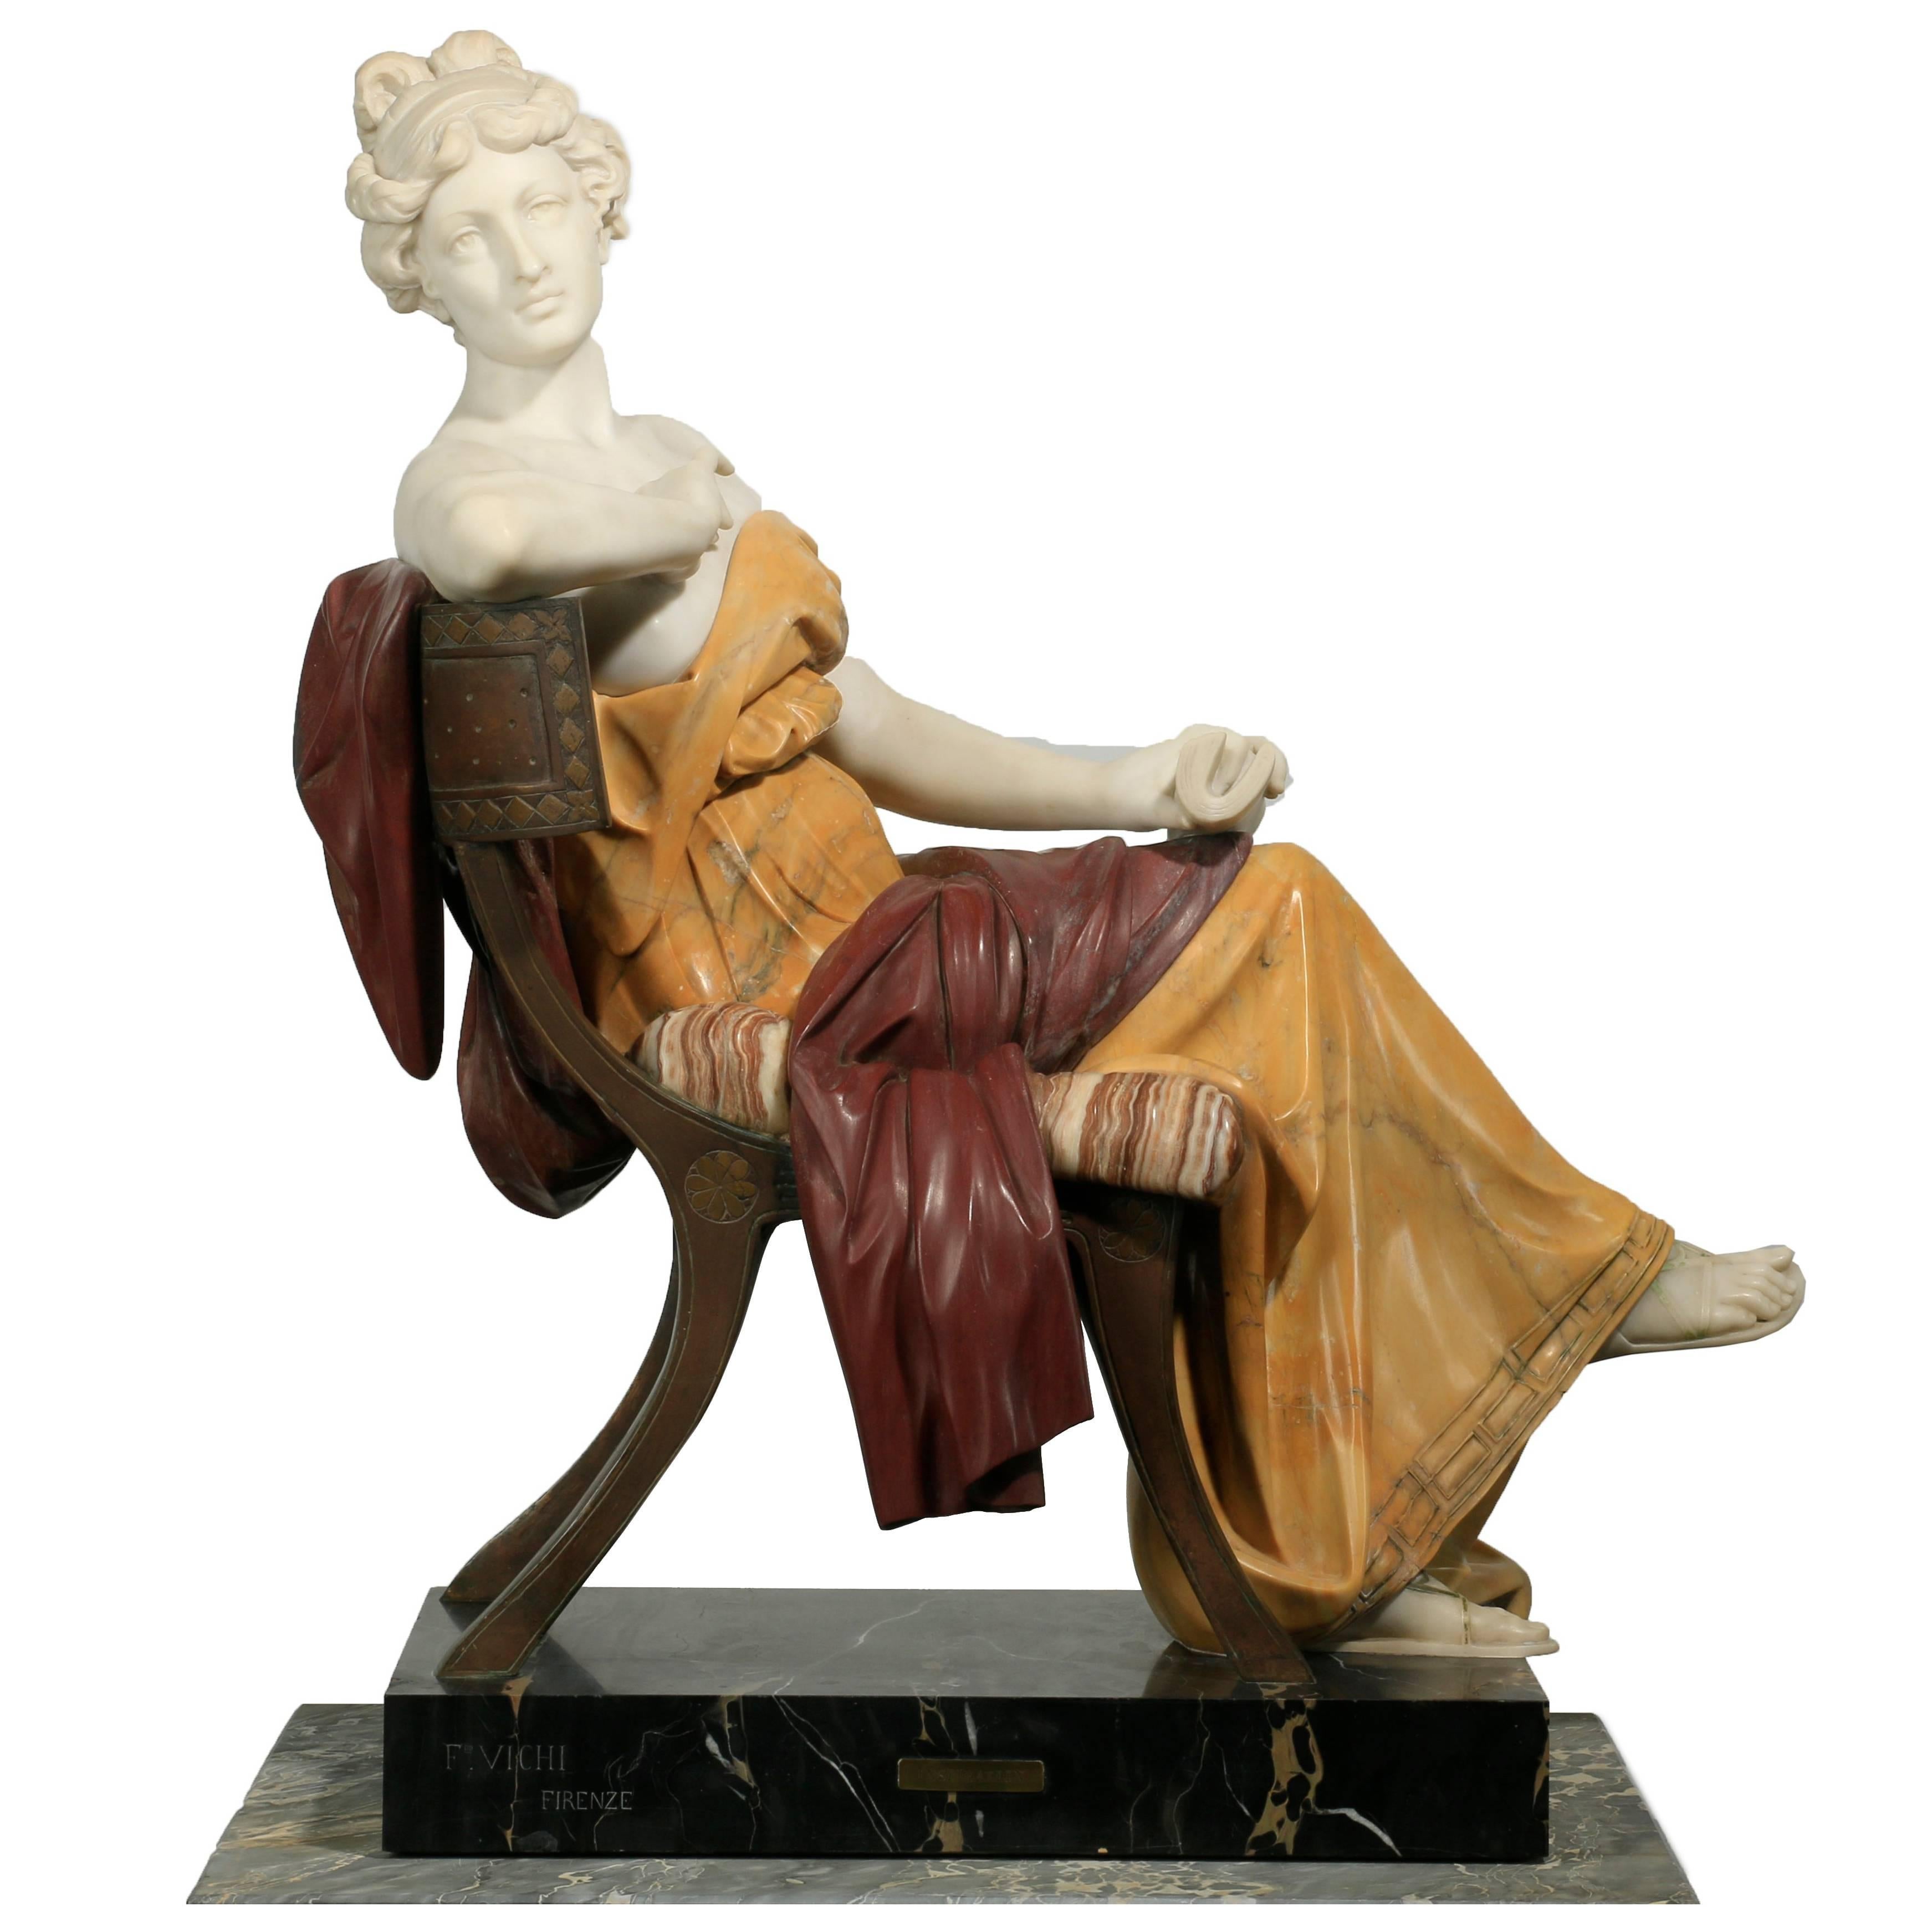 Finest Quality Mixed Marble and Bronze Sculpture by Ferdinando Vichi